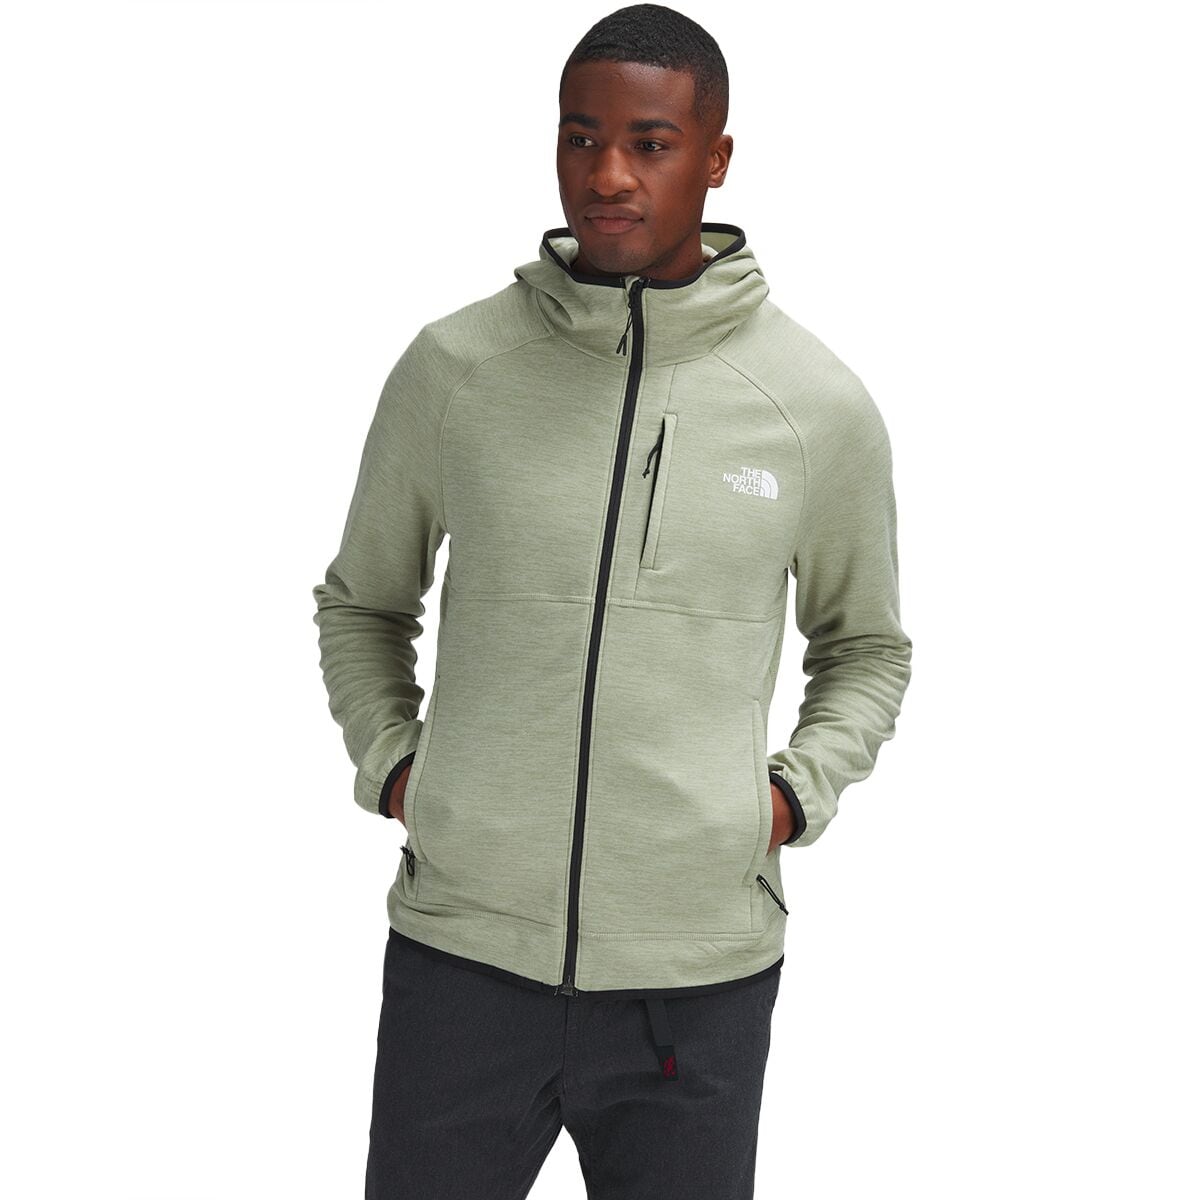 The North Face On Sale | Steep & Cheap